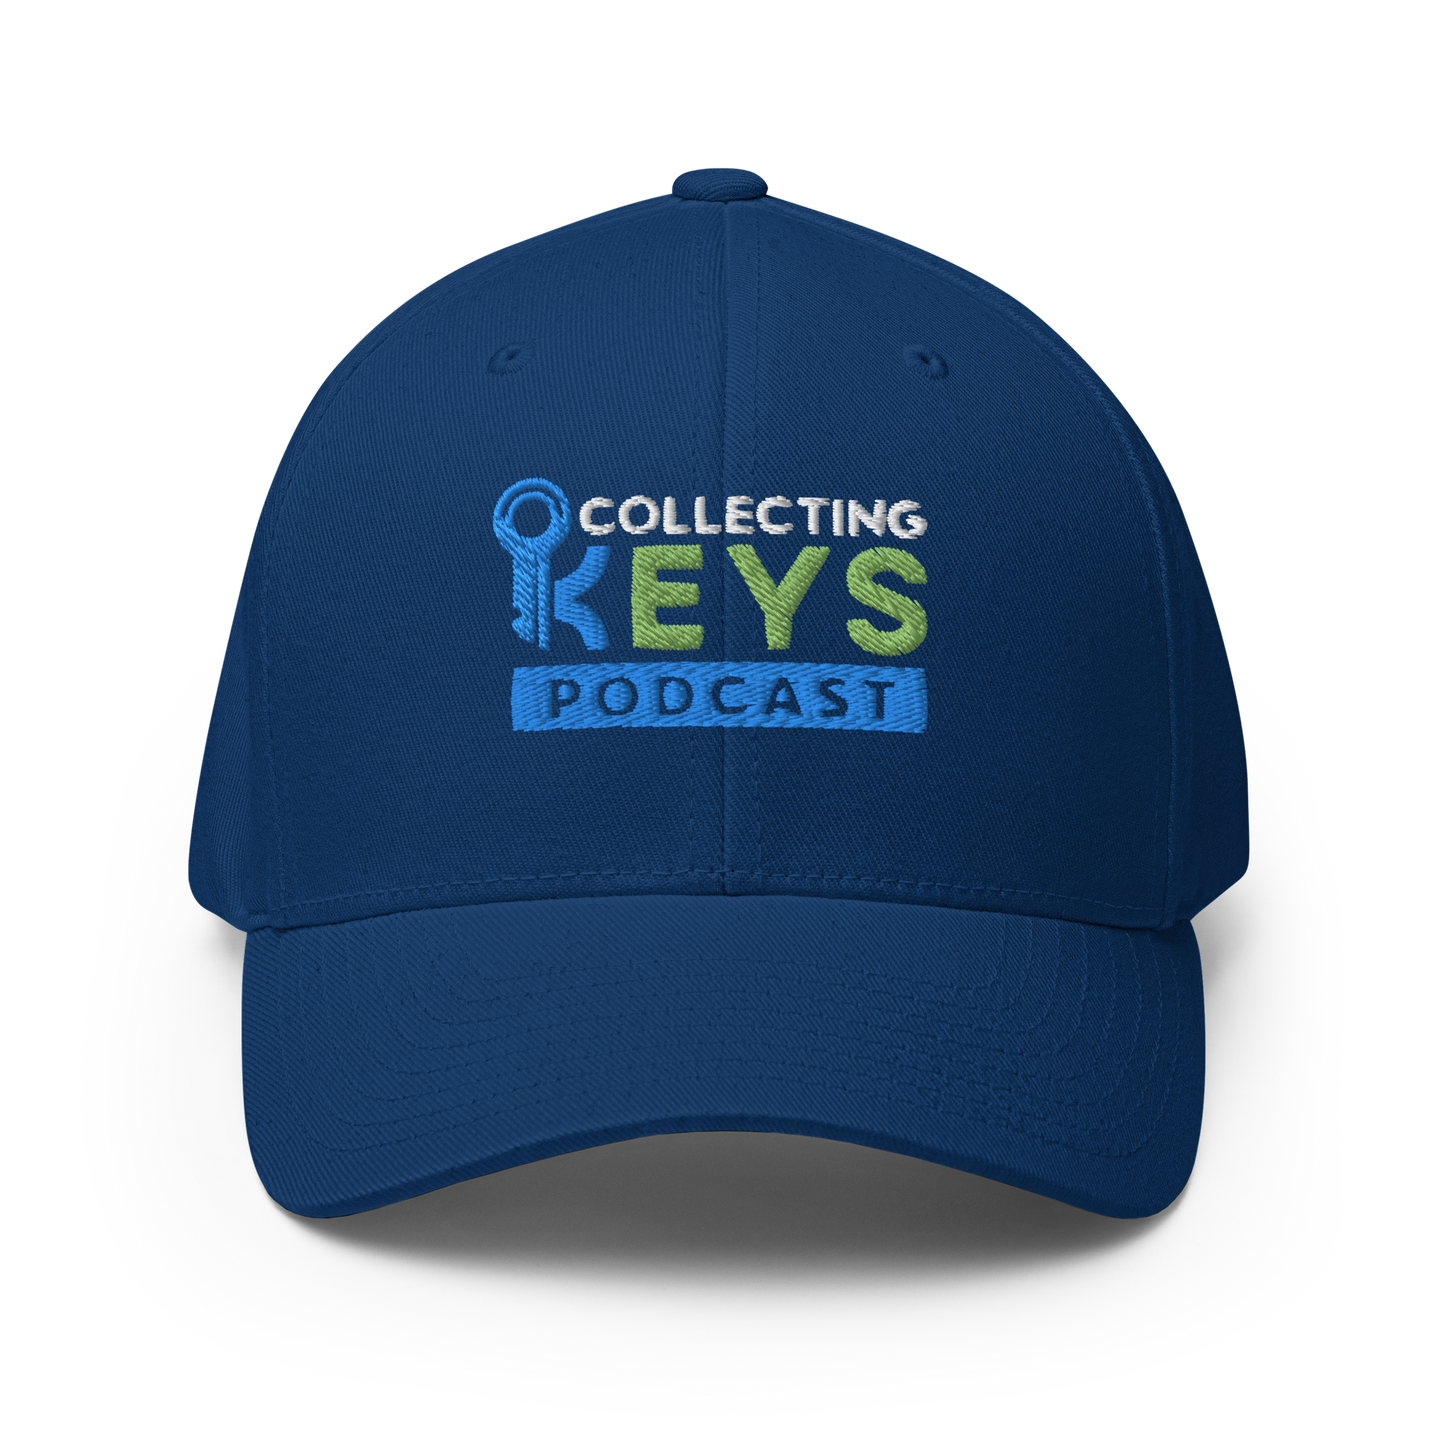 Collecting Keys Podcast - Cap